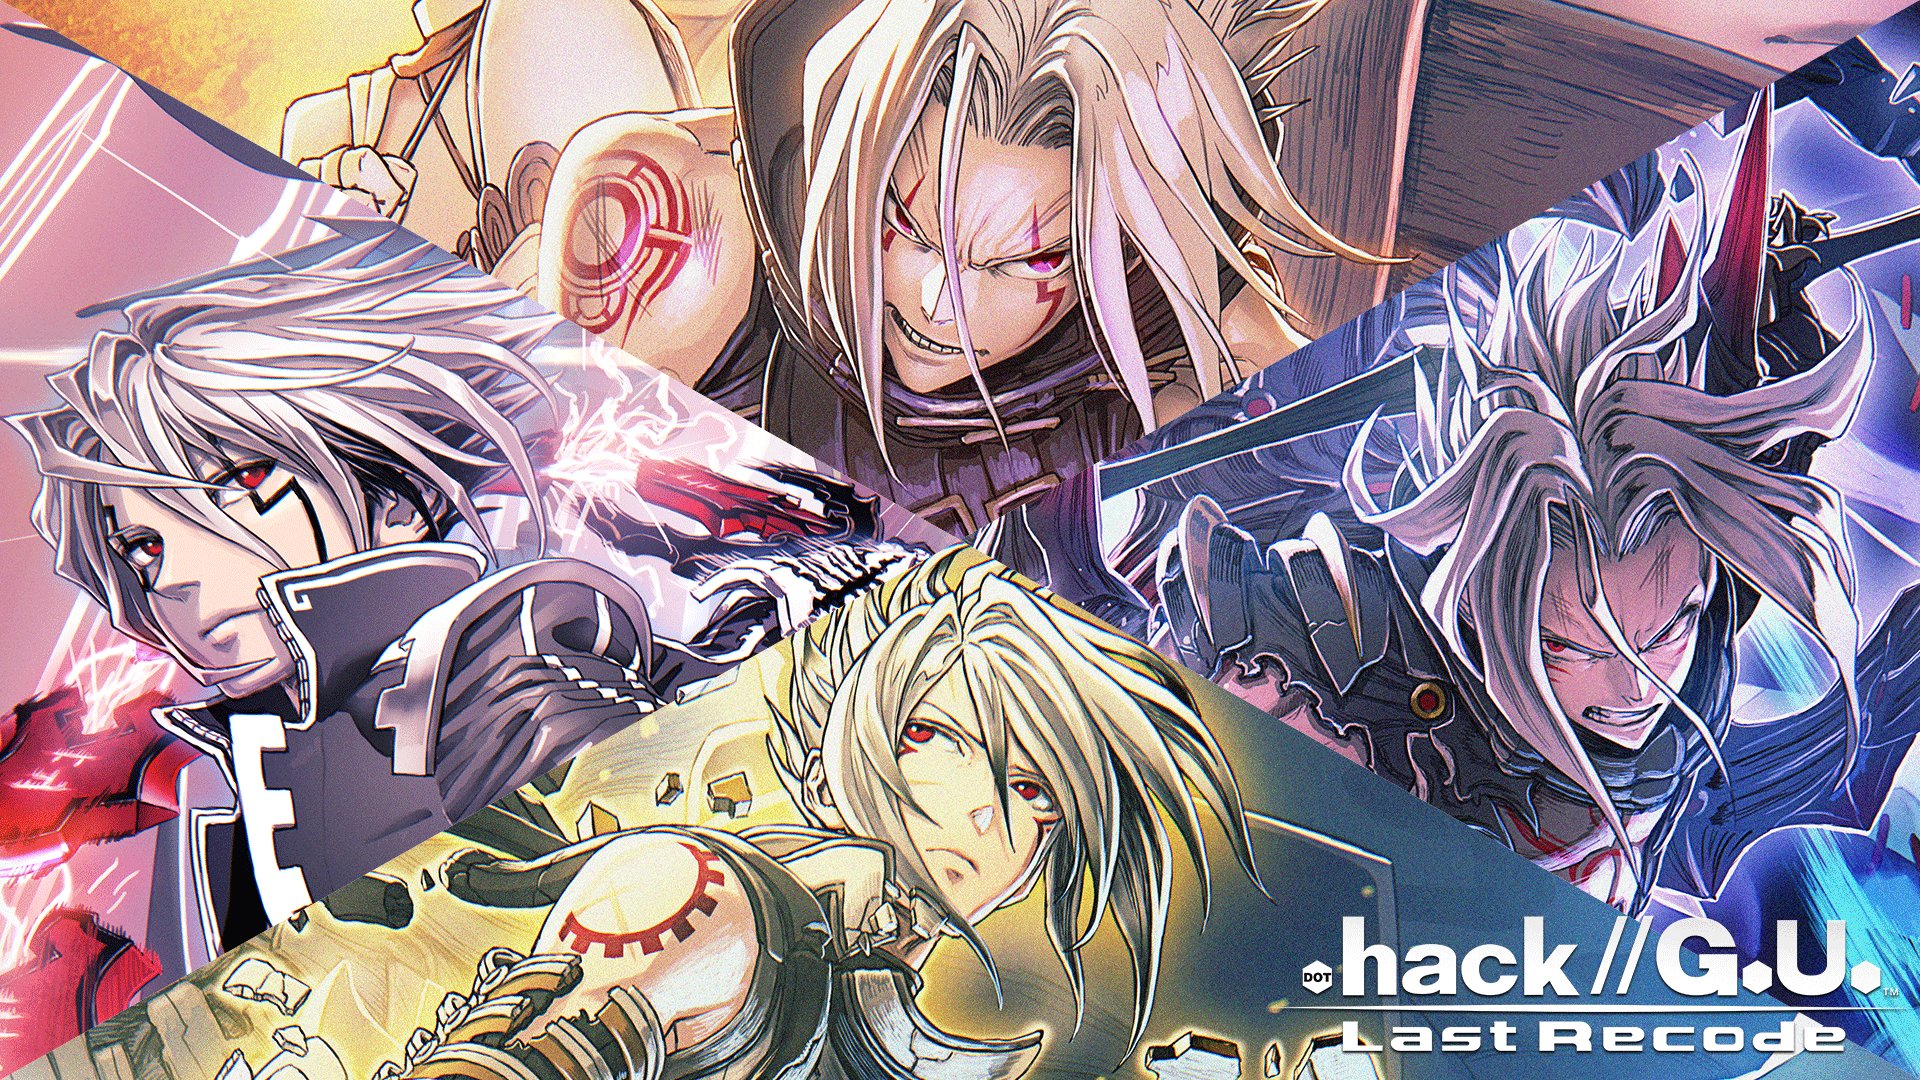 Bandai Namco US on X: Today we take a look back at previous volumes of . hack, with artwork from Vol. 1! Pre-order .hack//G.U. Last Recode    / X